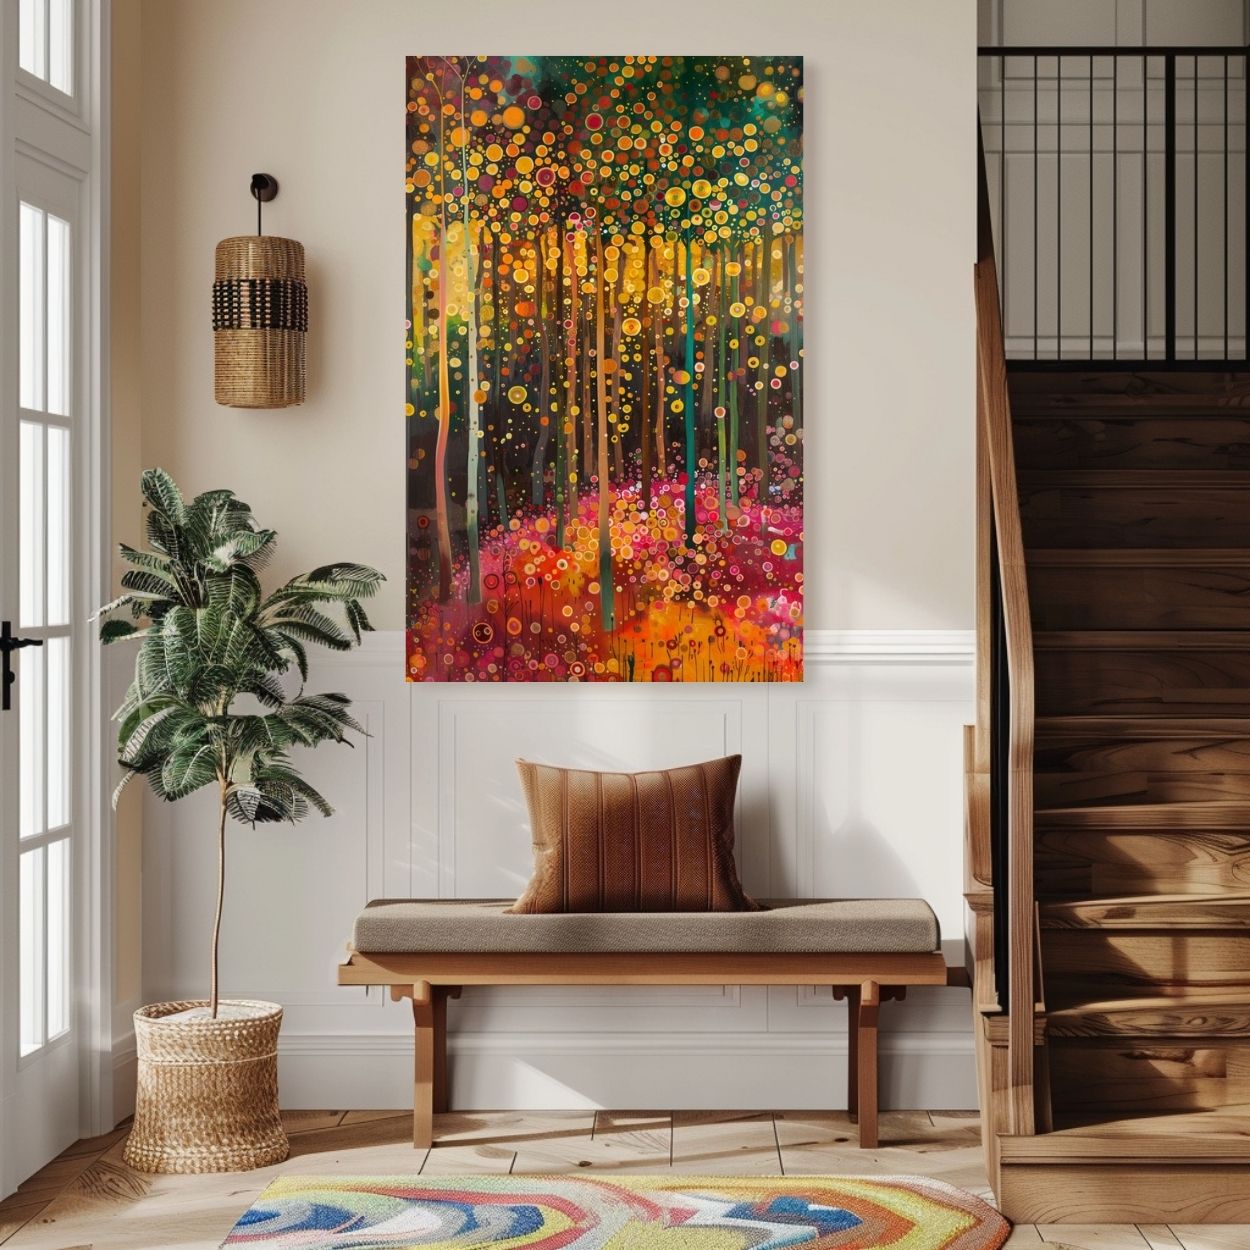 Product image showing canvas wall art of Glowing Grove - Summertime Forest and Sunbeams in a hallway